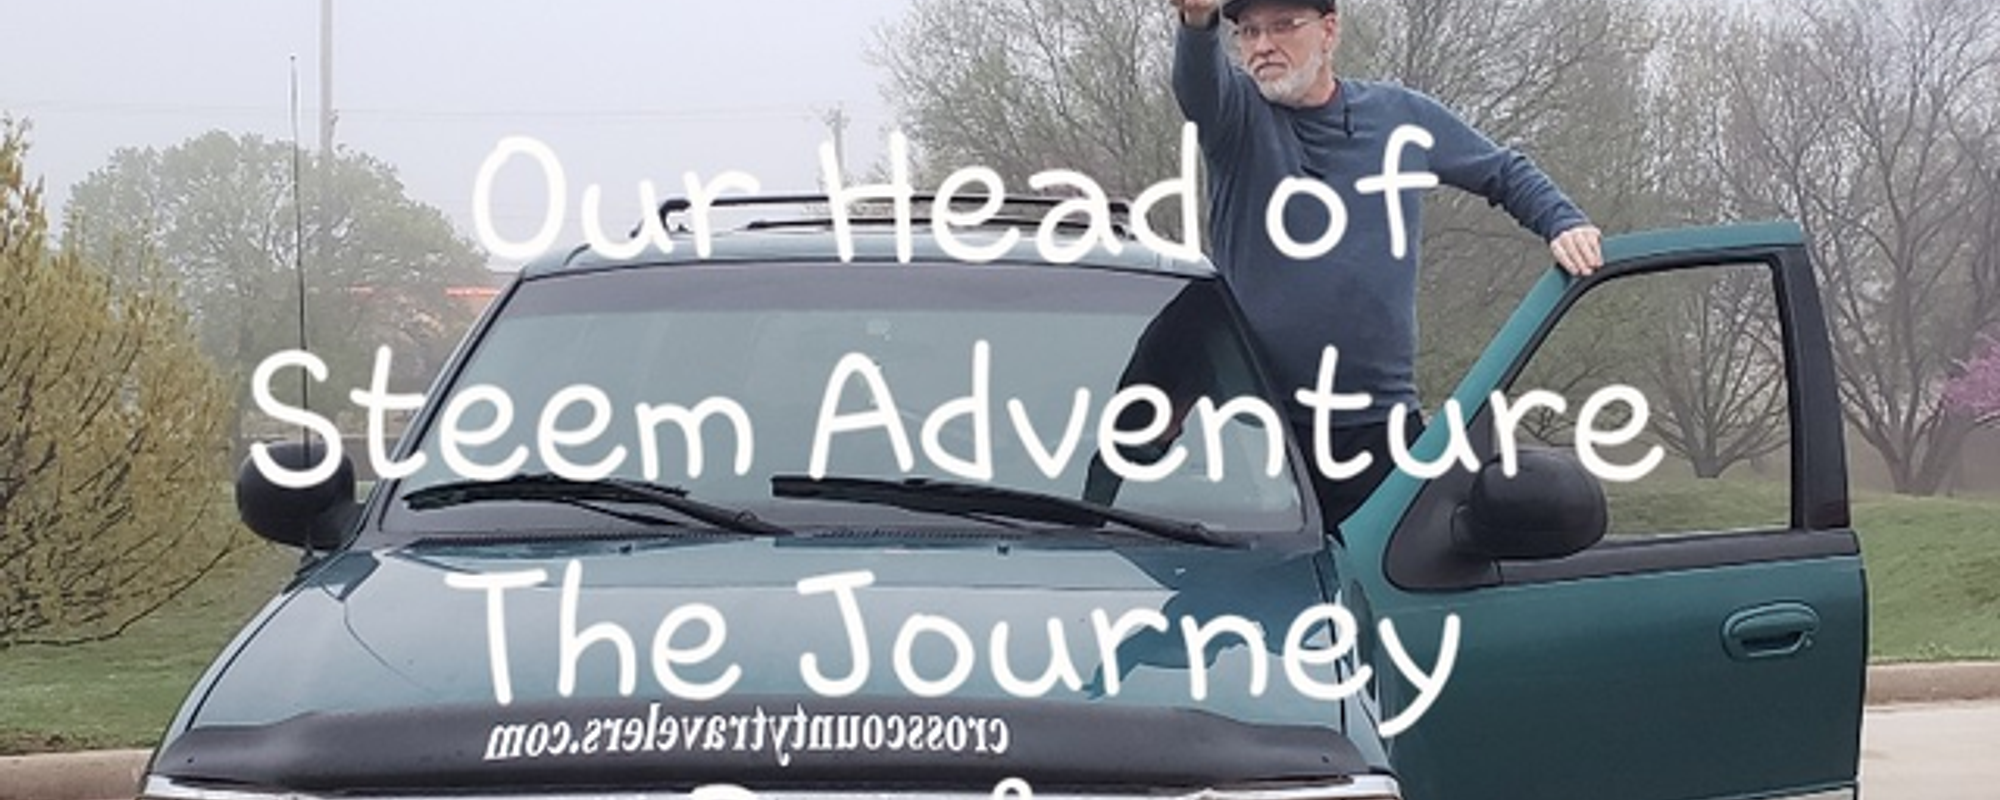 Day 3 - Our Head Of Steem Adventure  - The Journey Begins